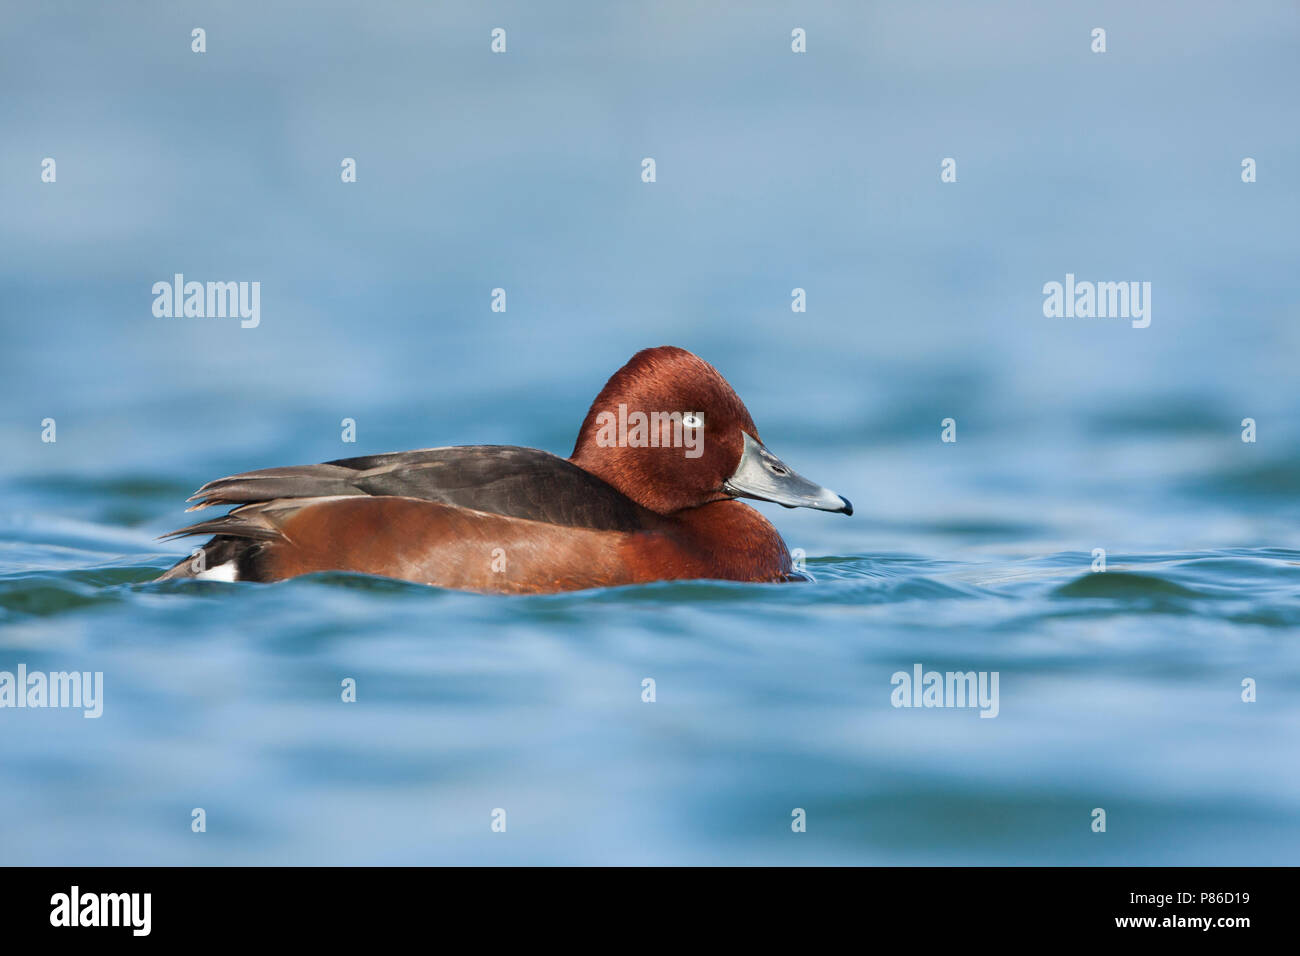 Ferruginous Duck, Witoogeend, Aythya nyroca, France, adult male Stock Photo